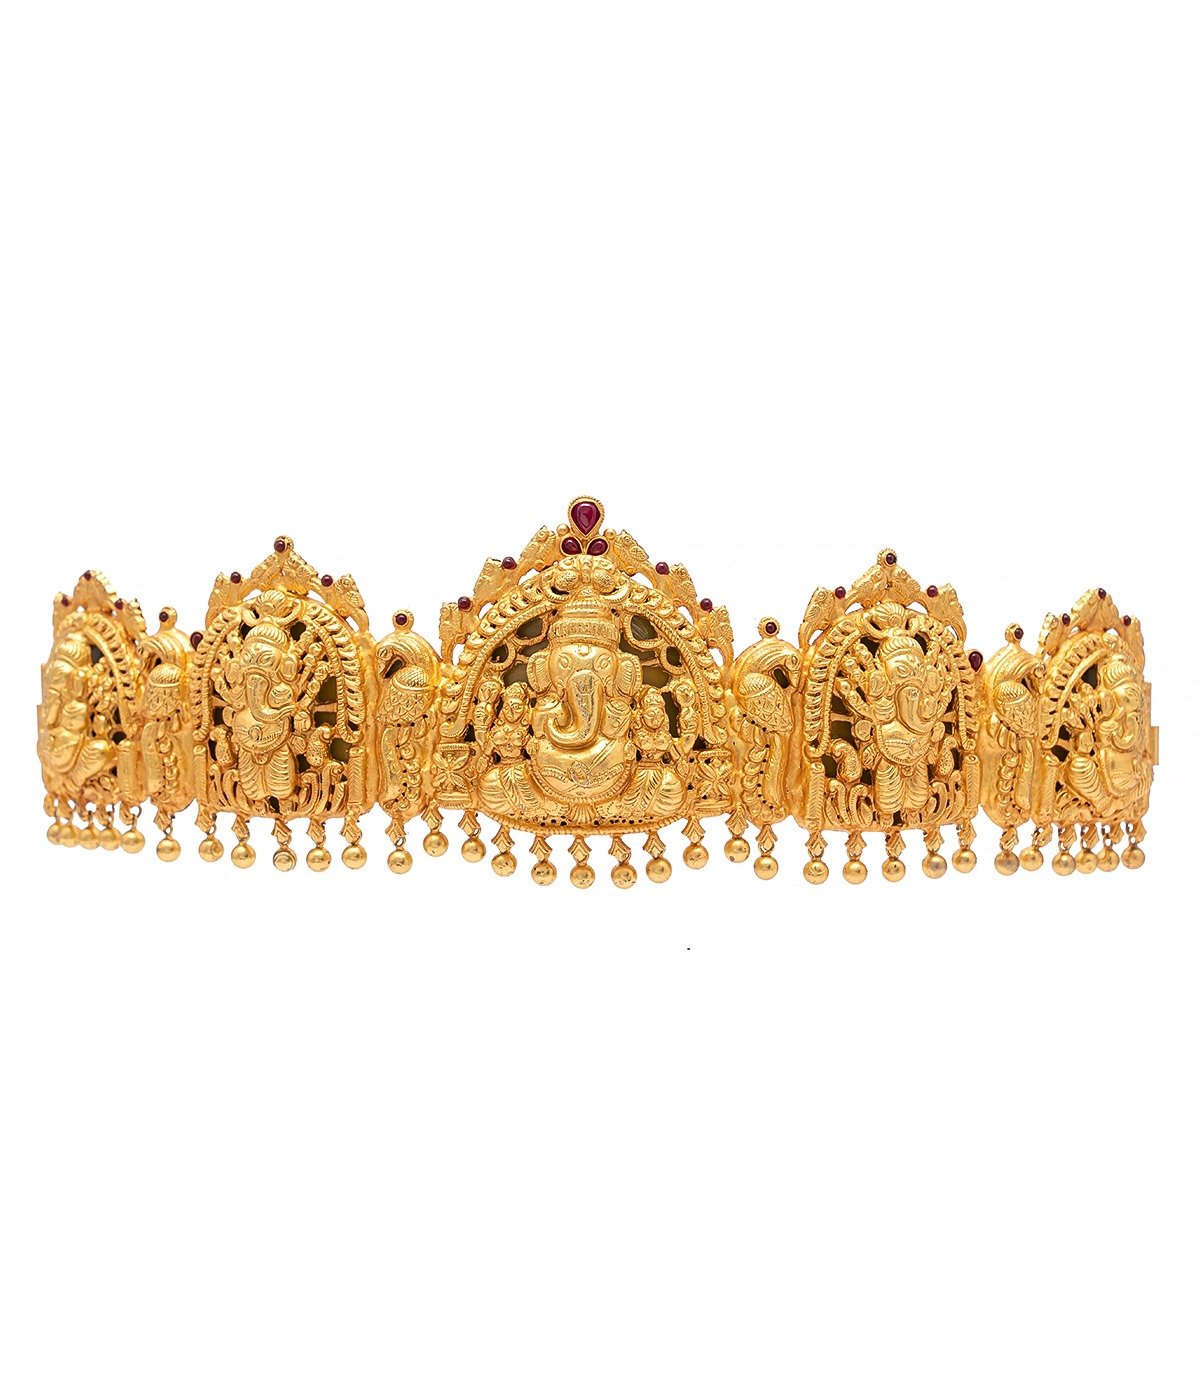 GOLD POLISHED GANESH DESIGN WAISTCHAIN WITH GOLD BEADS